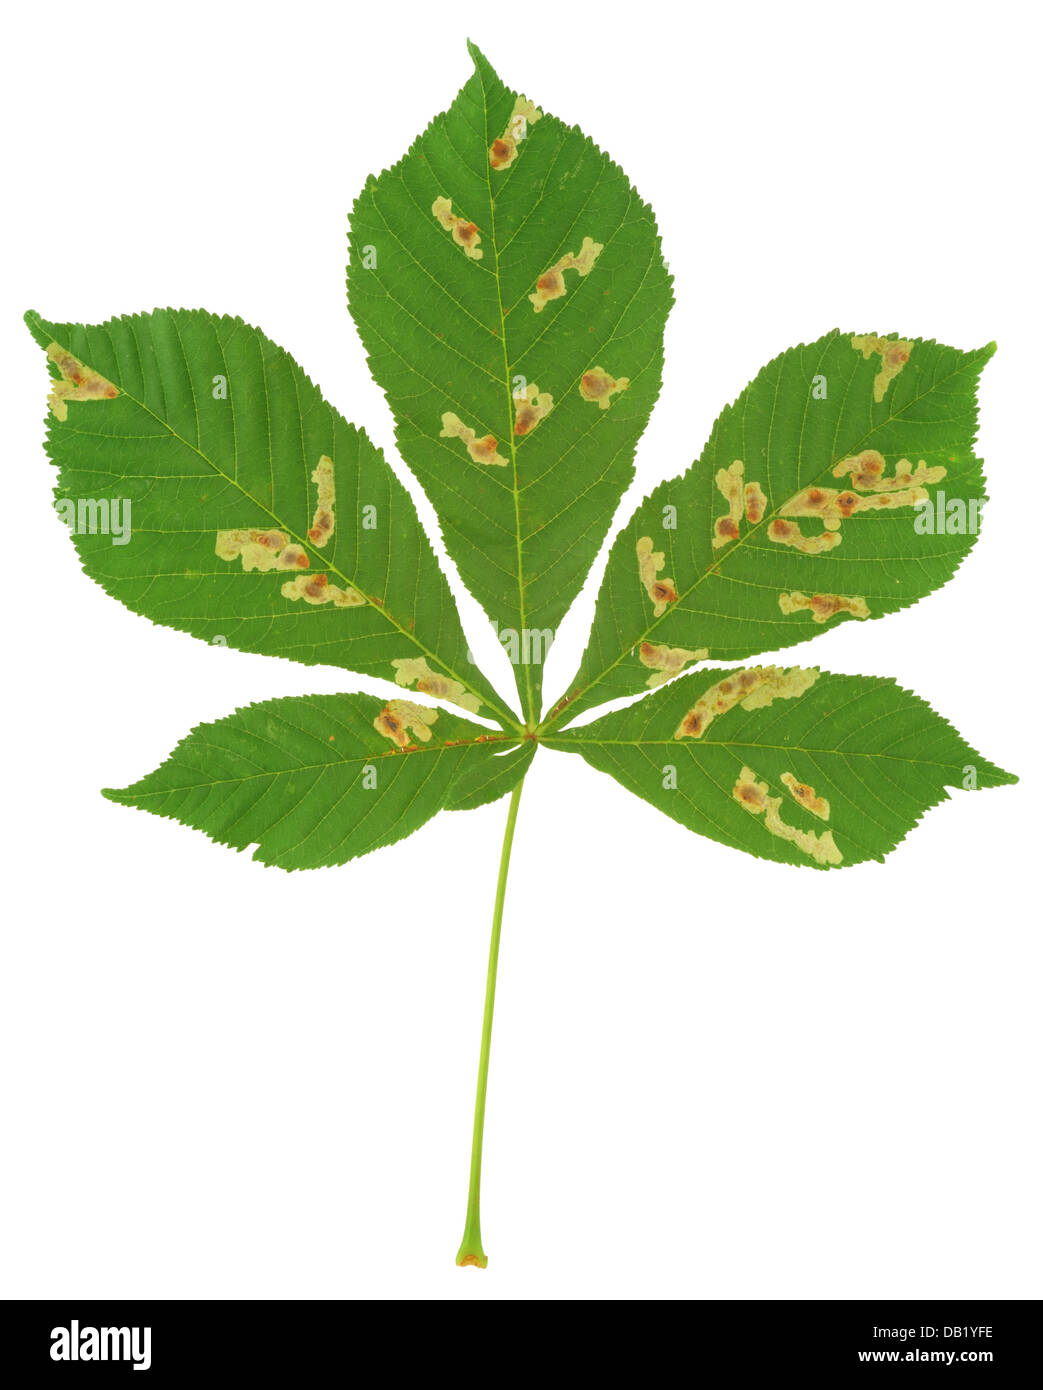 Leaf of chestnut tree attacked by horse-chestnut leaf miner, Cameraria ohridella Stock Photo